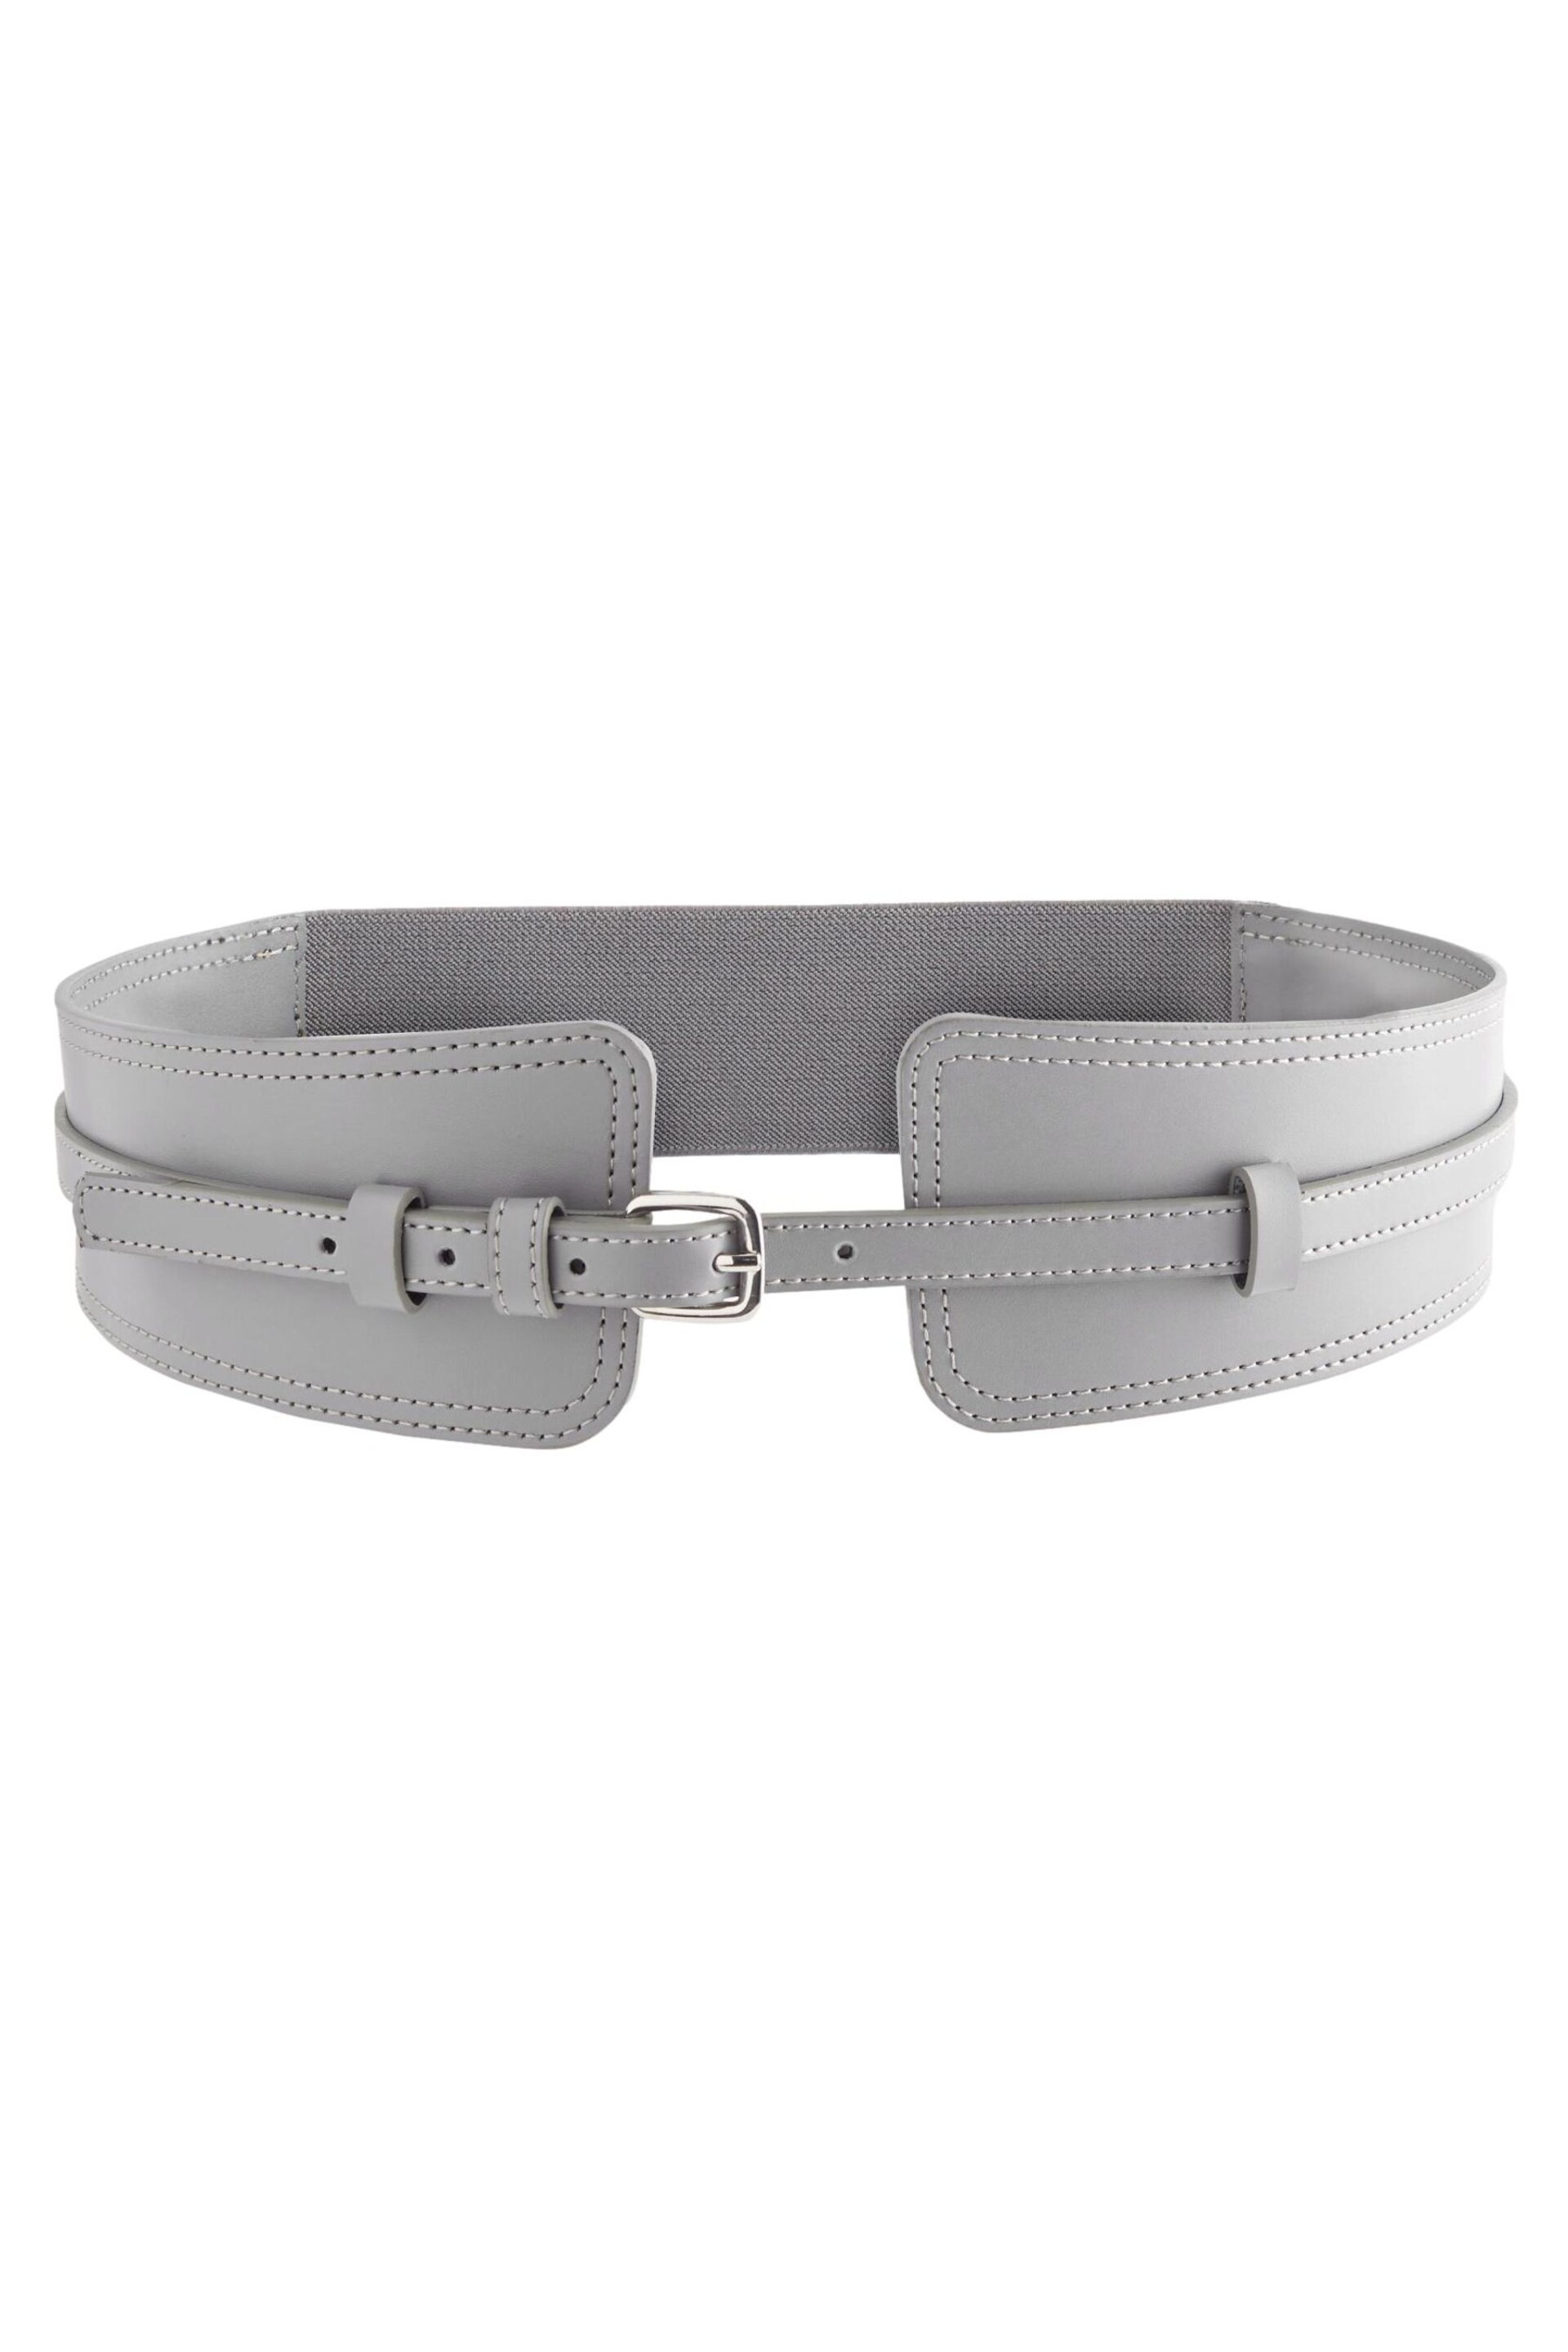 Grey Leather Wide Corset Belt - Image 3 of 4